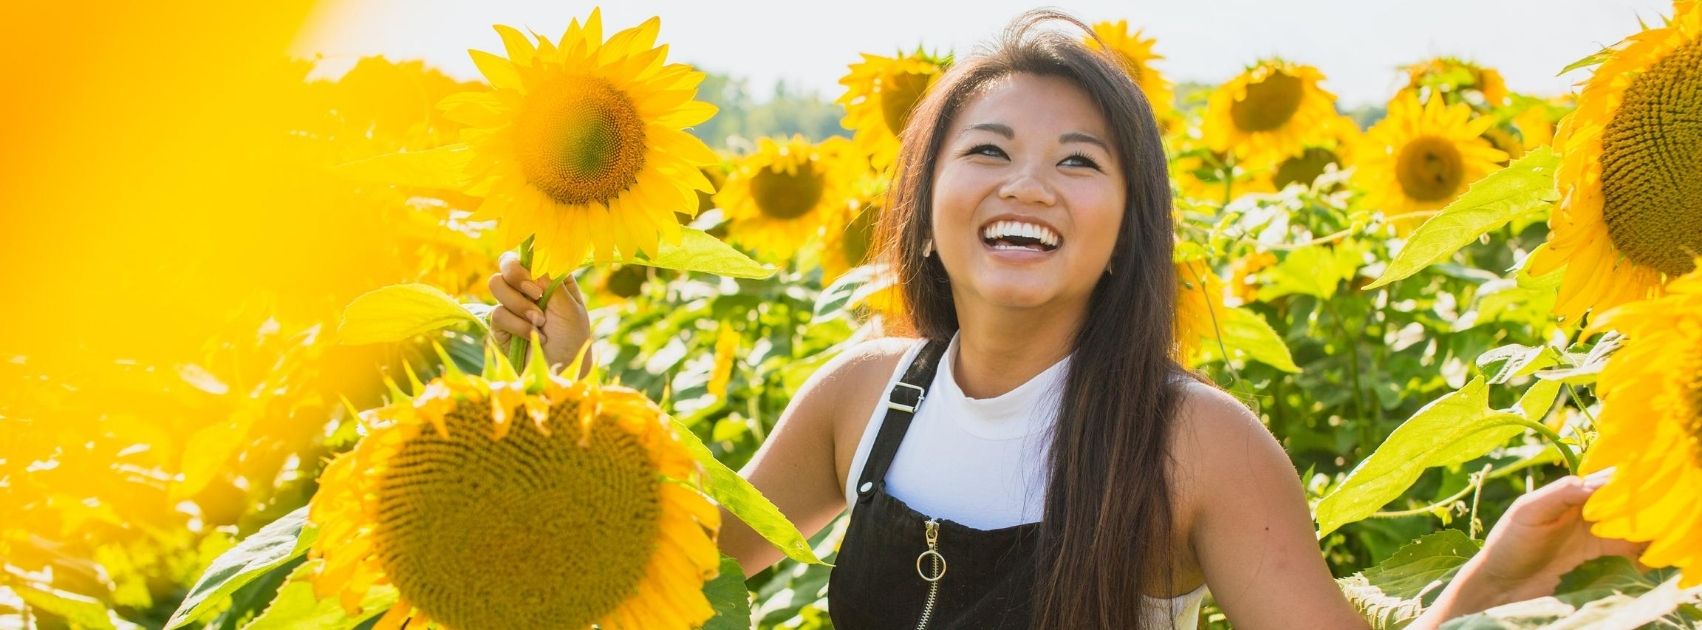 woman laughing in a sunflower field